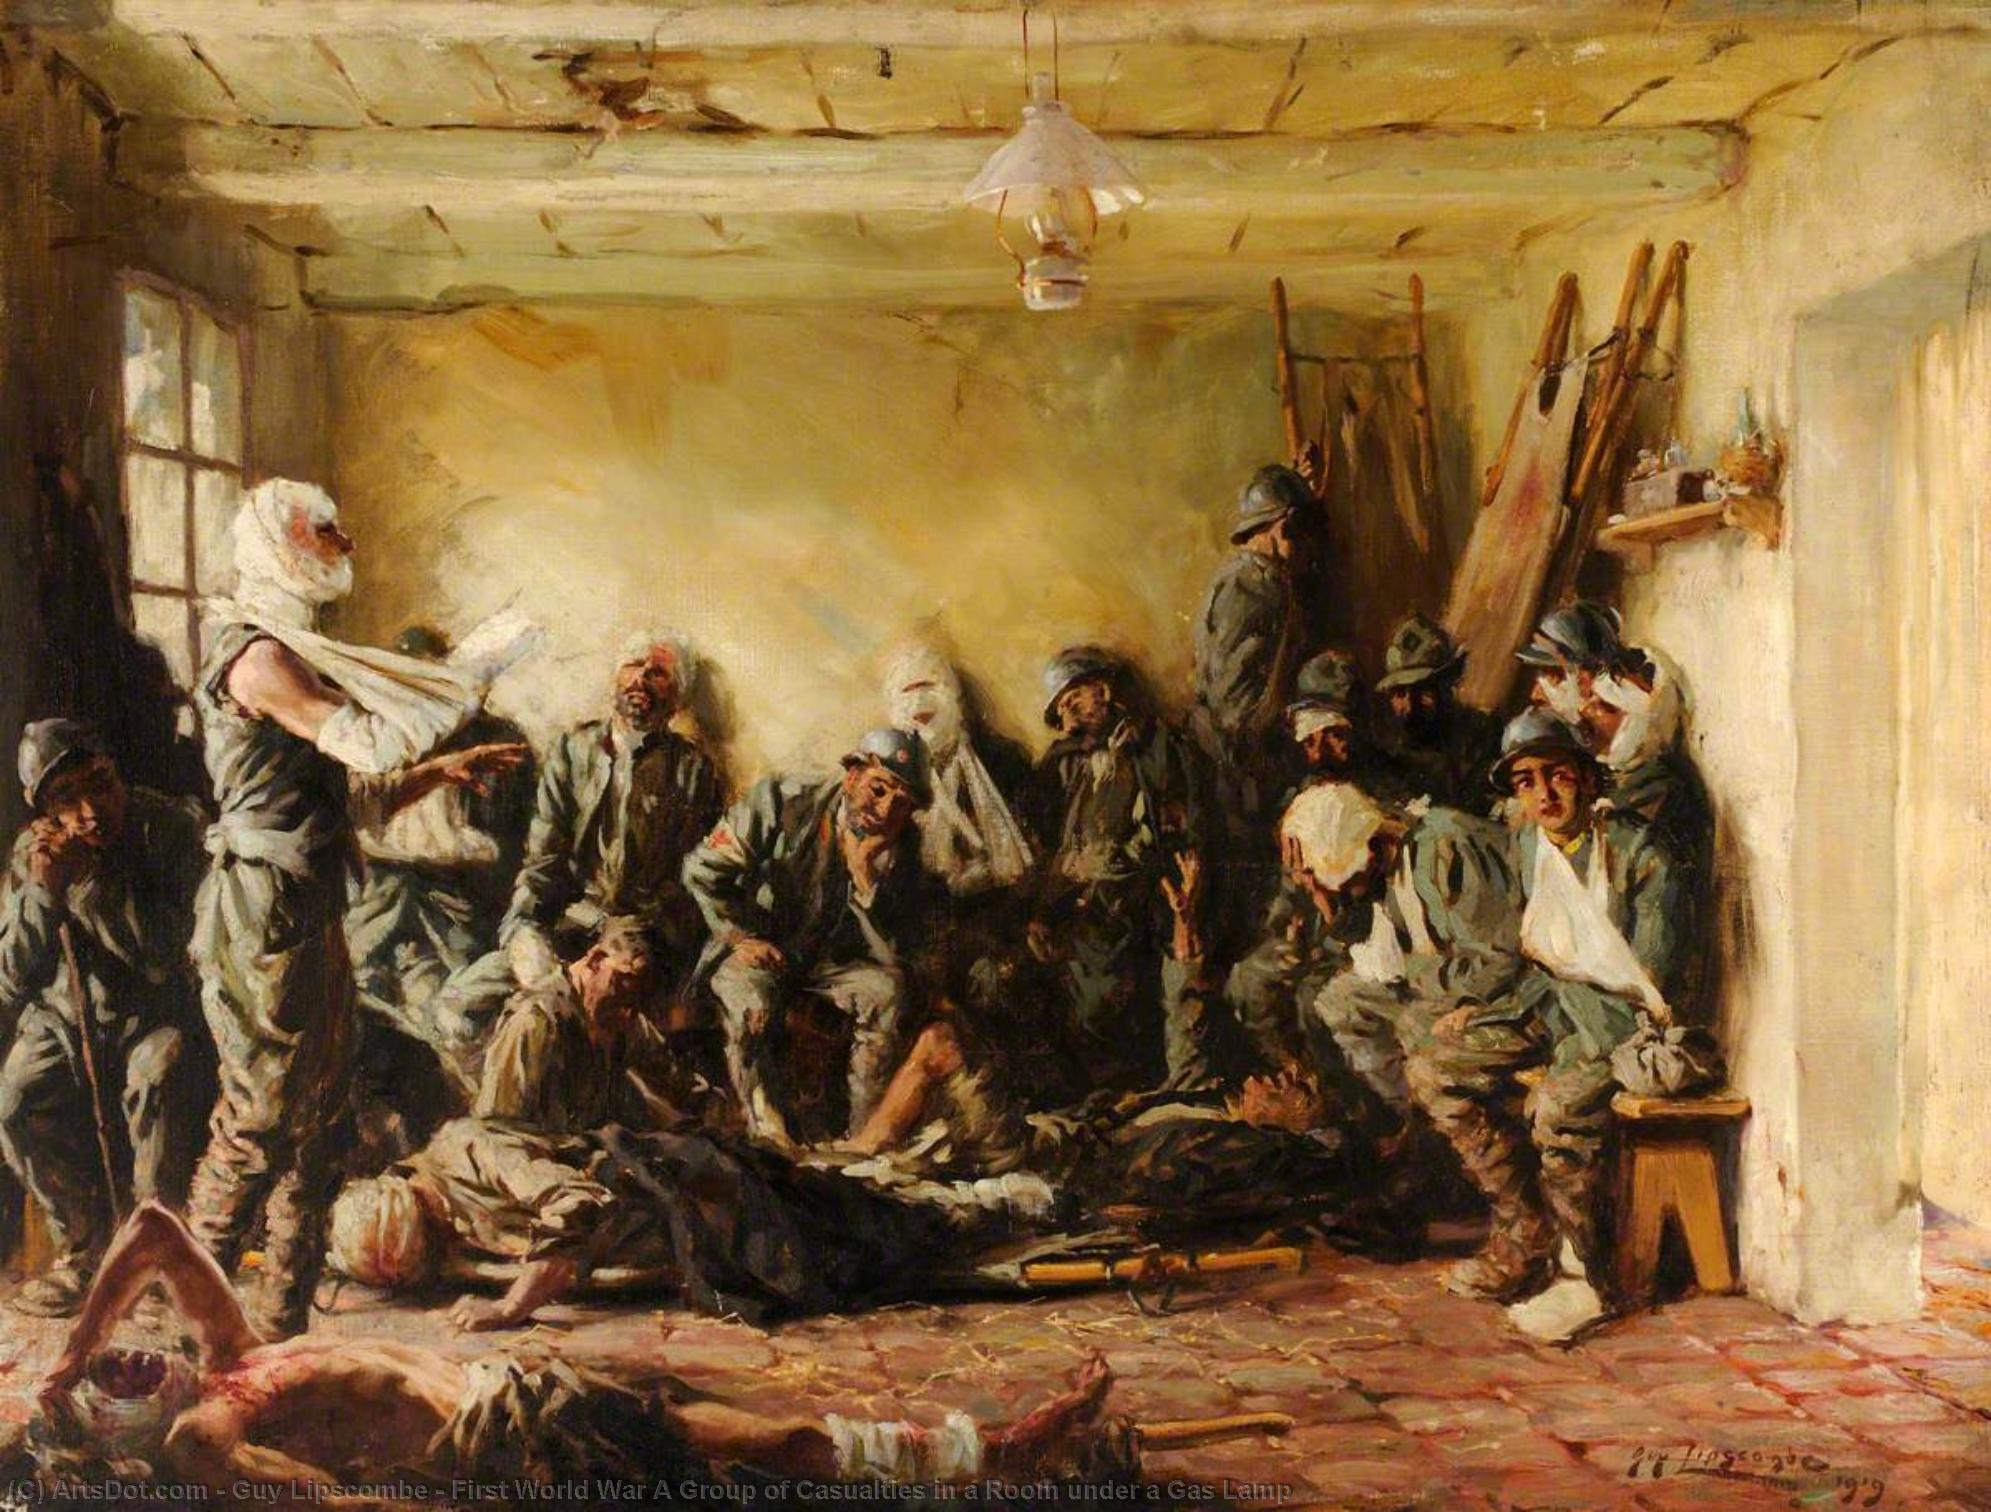 Order Artwork Replica First World War A Group of Casualties in a Room under a Gas Lamp, 1919 by Guy Lipscombe (1881-1952) | ArtsDot.com